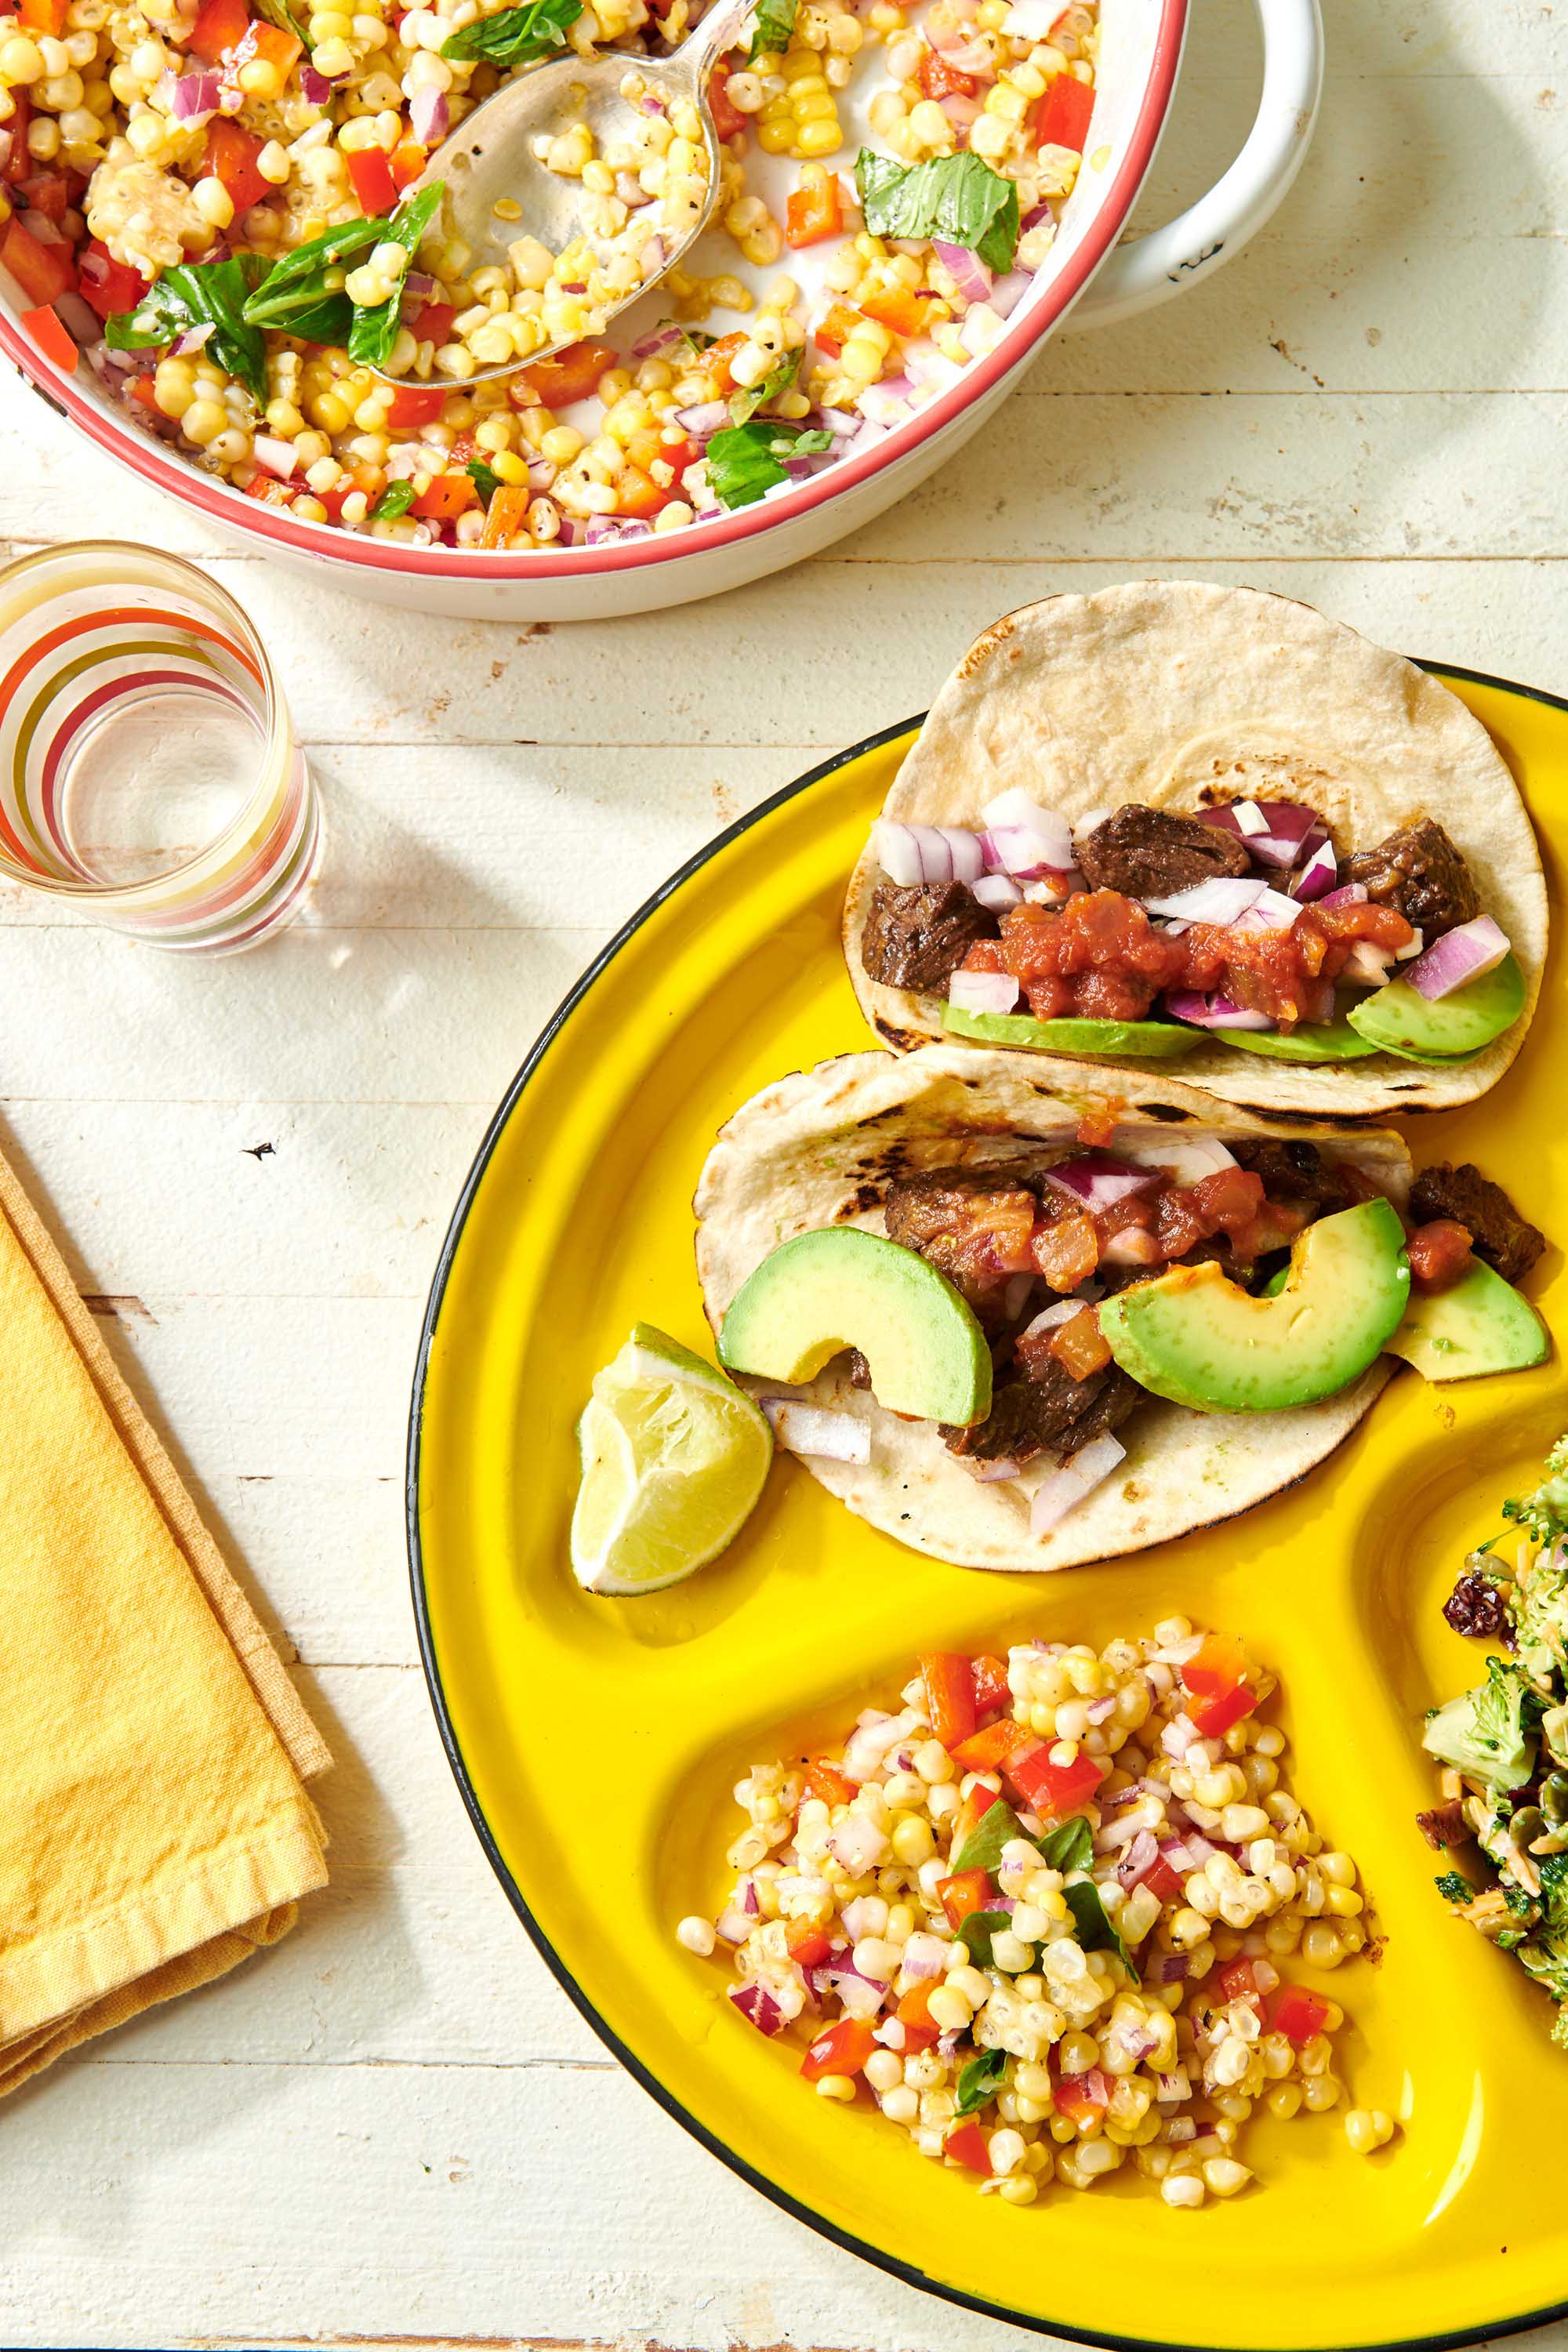 Steak Street Tacos on a yellow plate with corn salad.